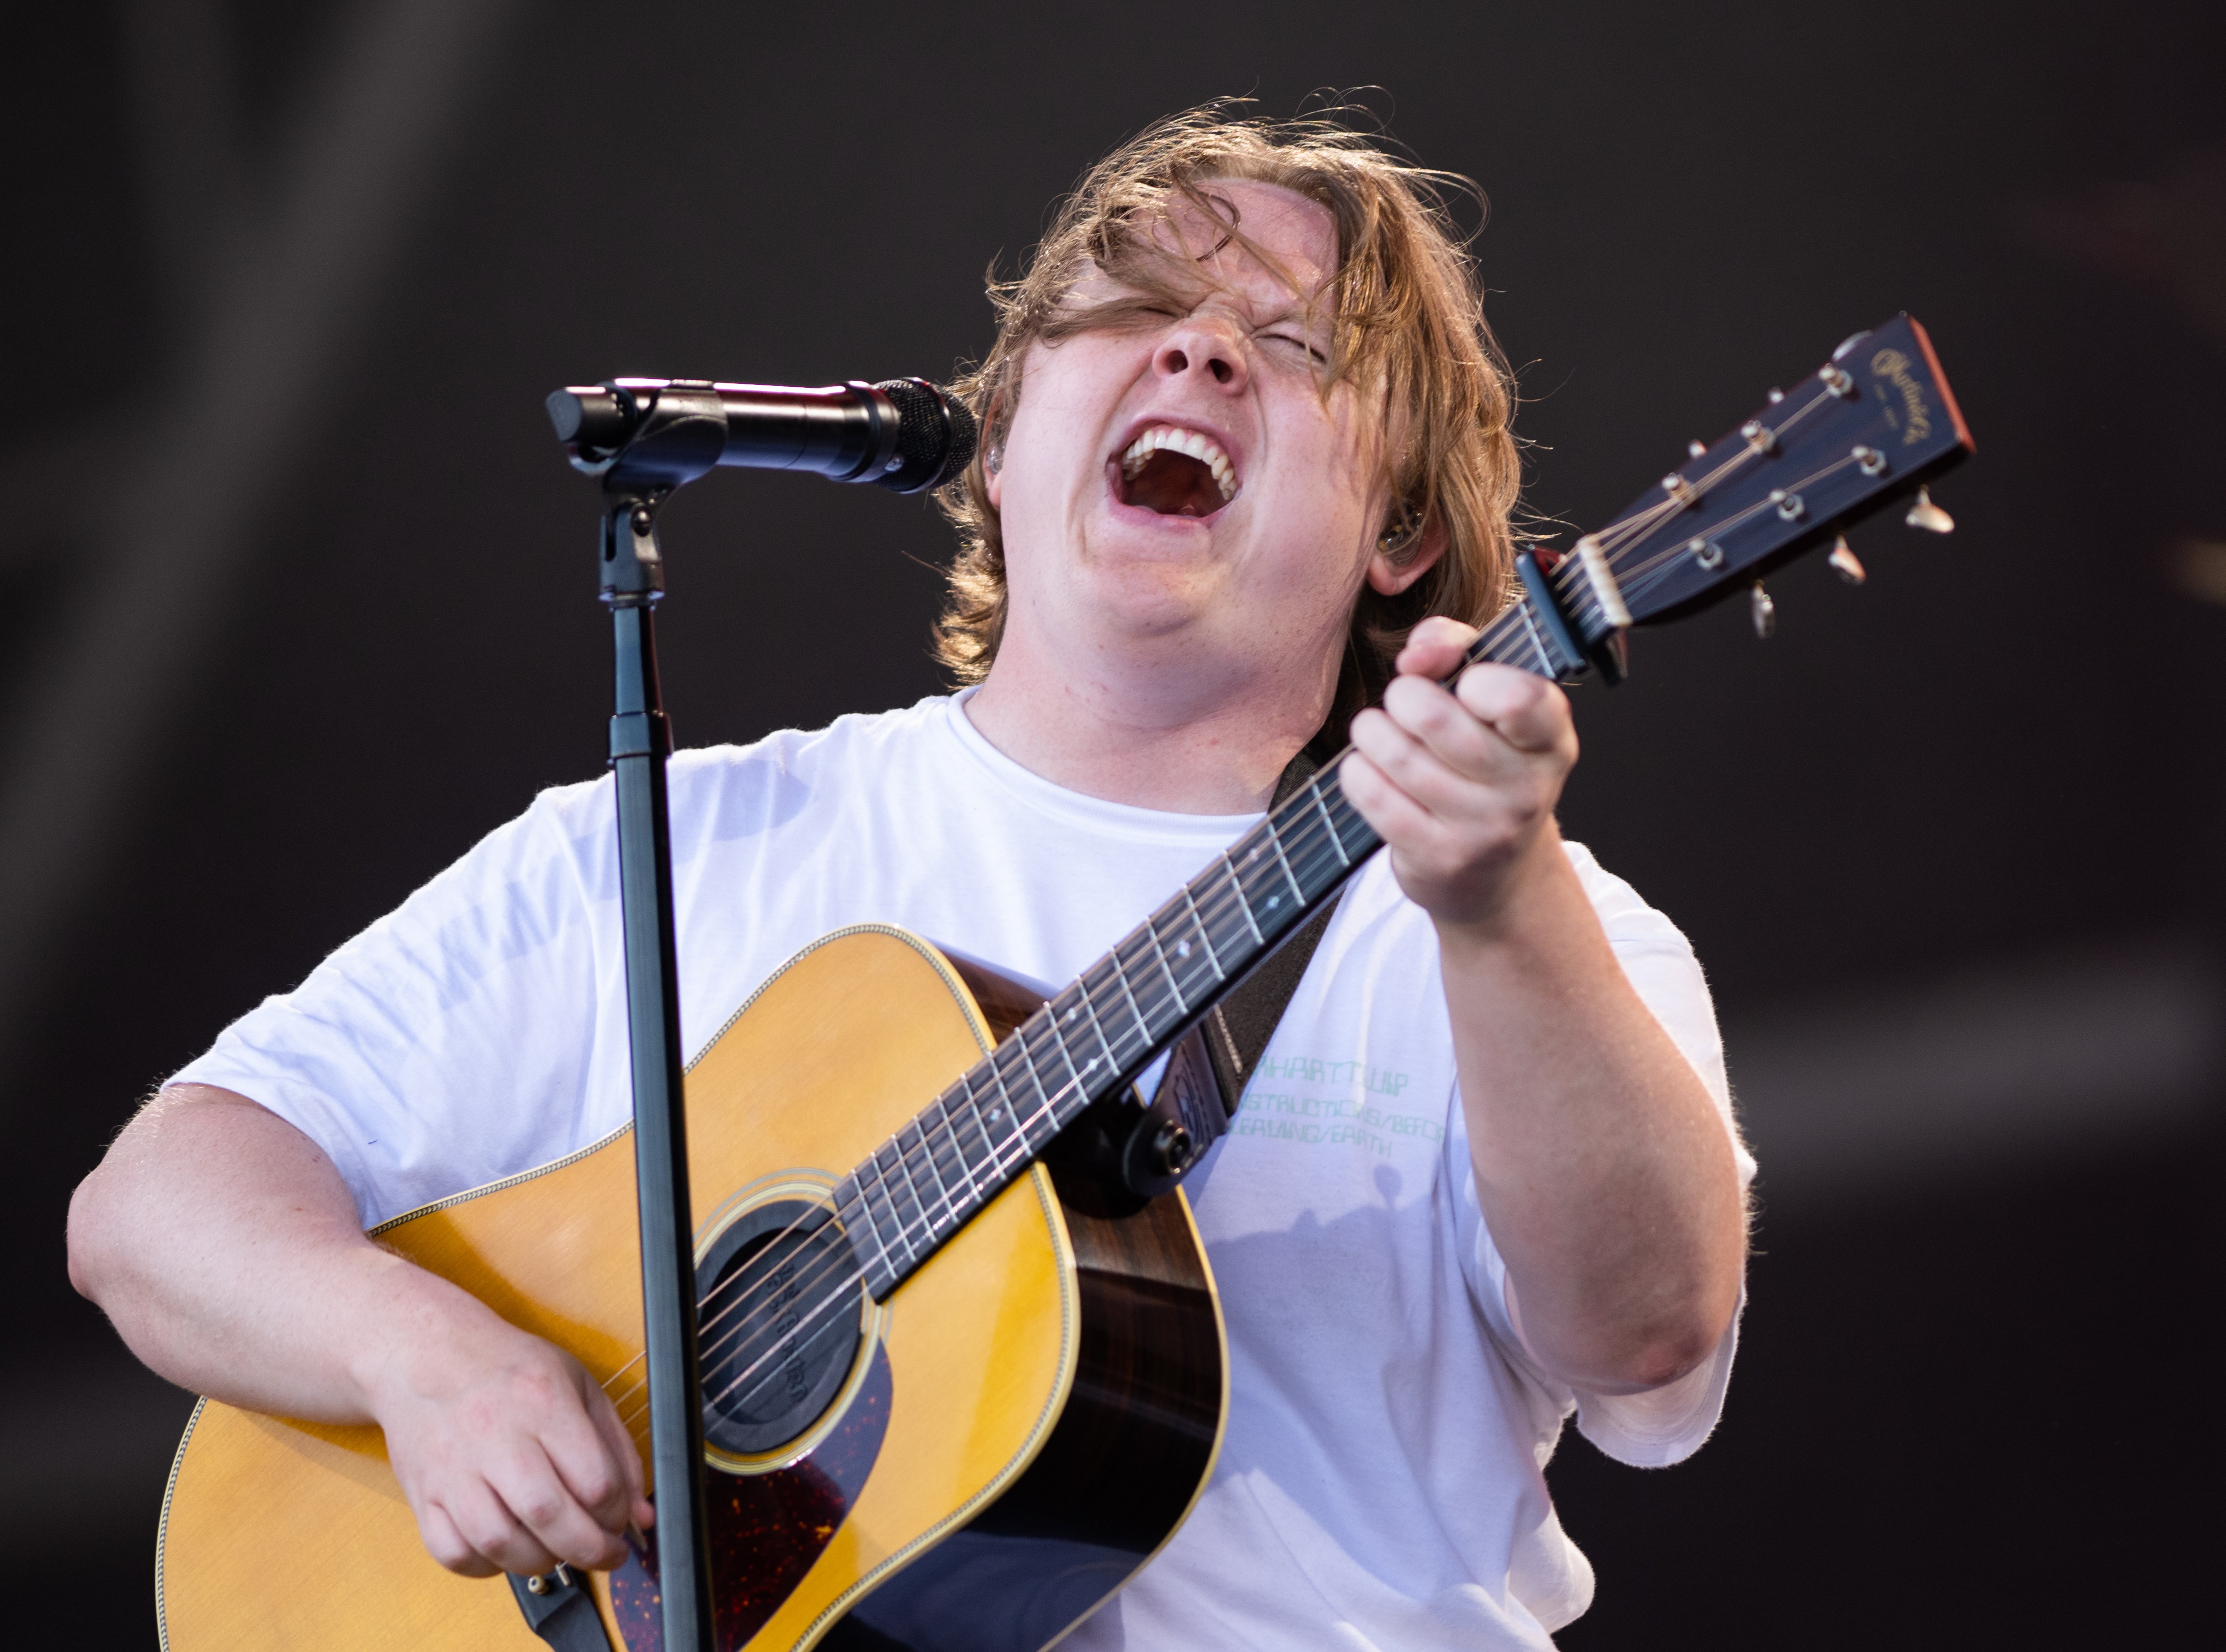 Lewis Capaldi Cancels Tour After Glastonbury to Focus on His Physical and Mental Health